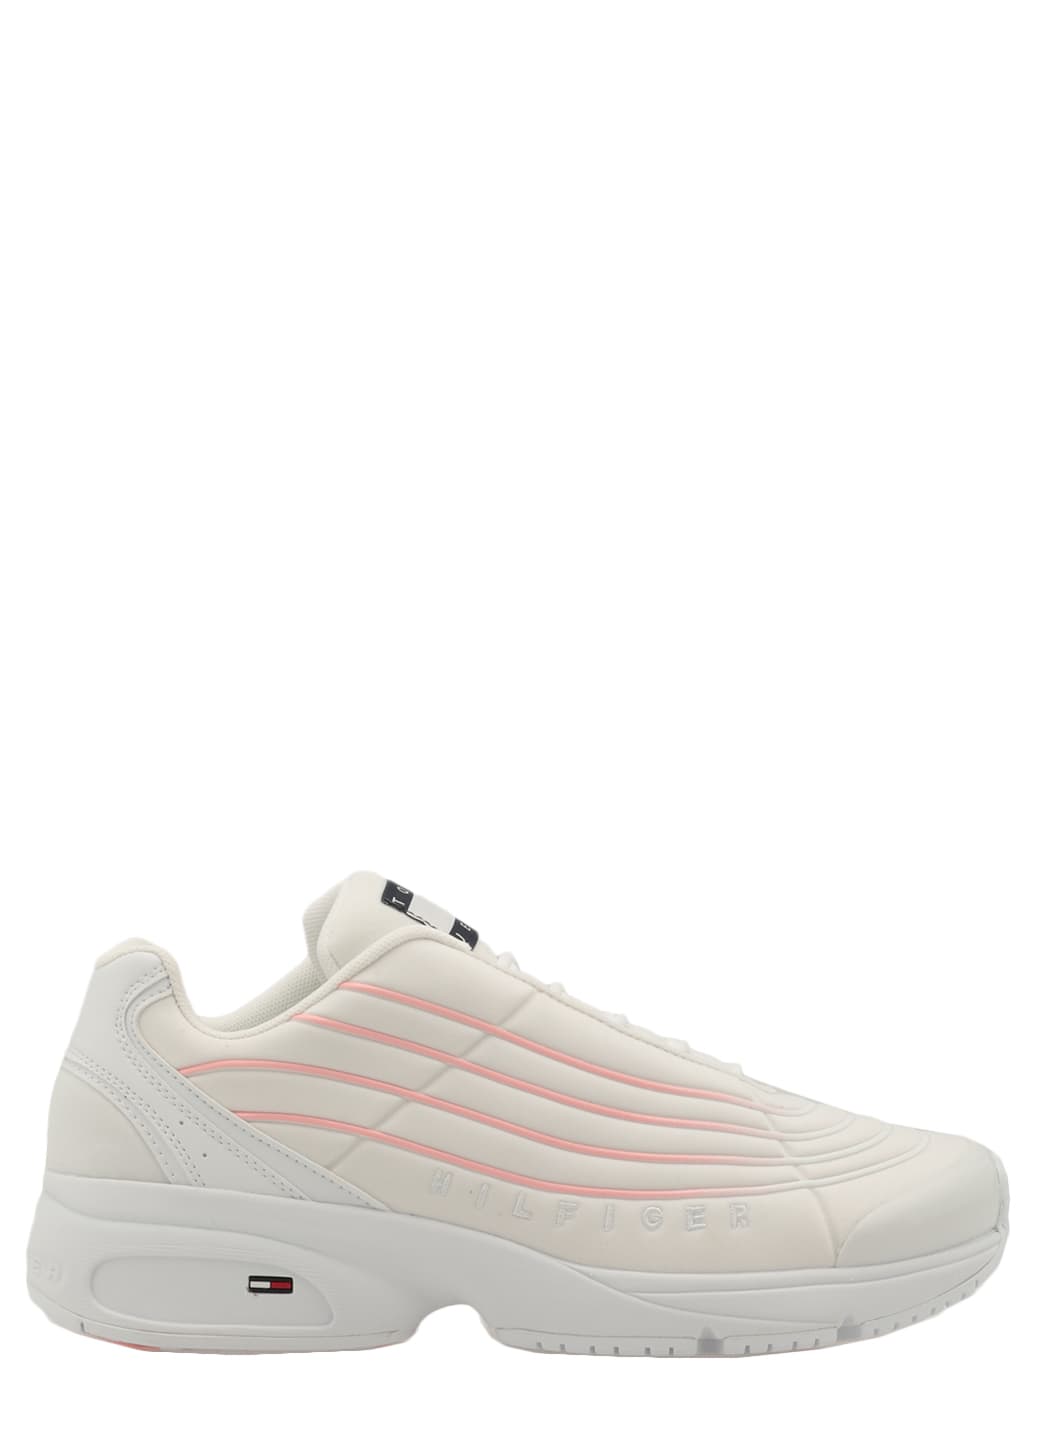 Buy Tommy Hilfiger Nuanced Stripes Sneaker online, shop Tommy Hilfiger shoes with free shipping